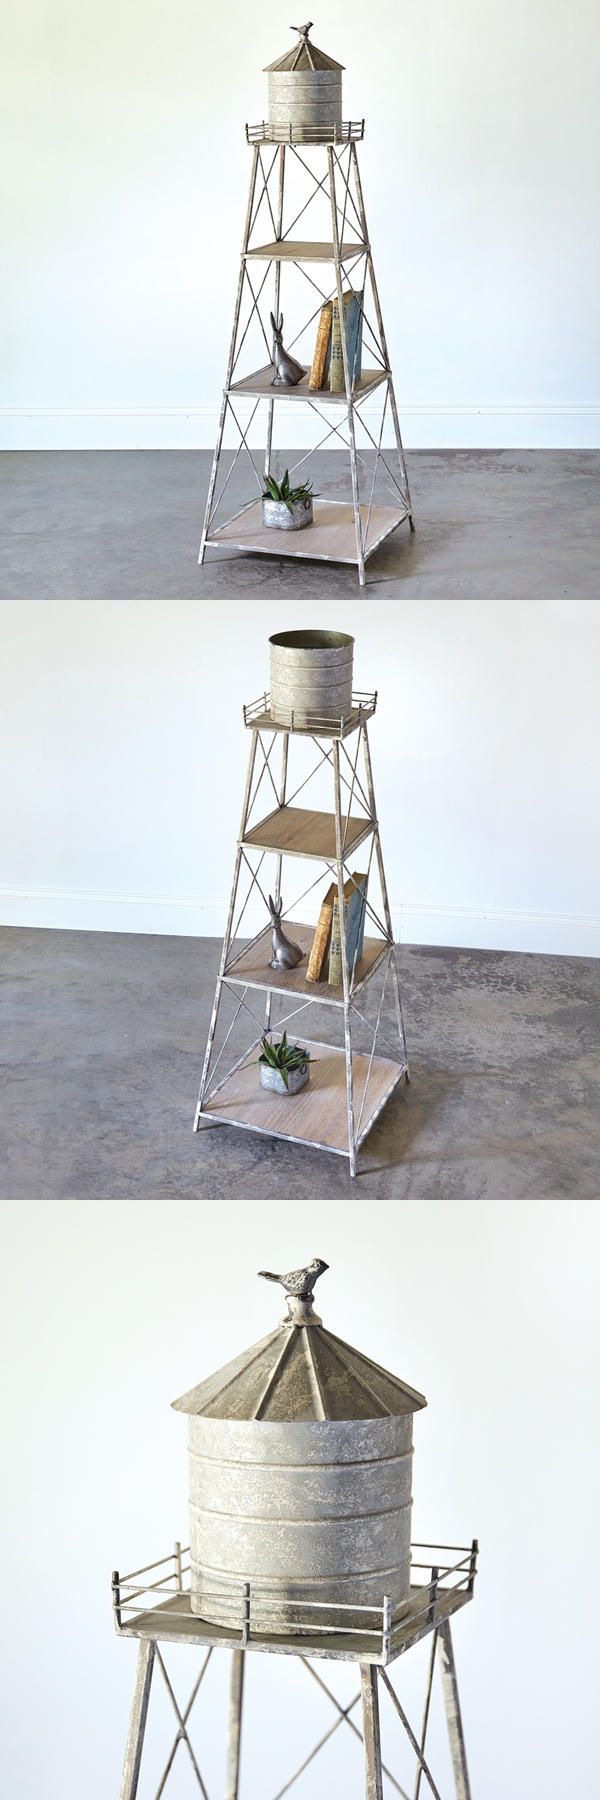 CTW Home Collection Metal Silo Three-Tier Display with Wood Shelves